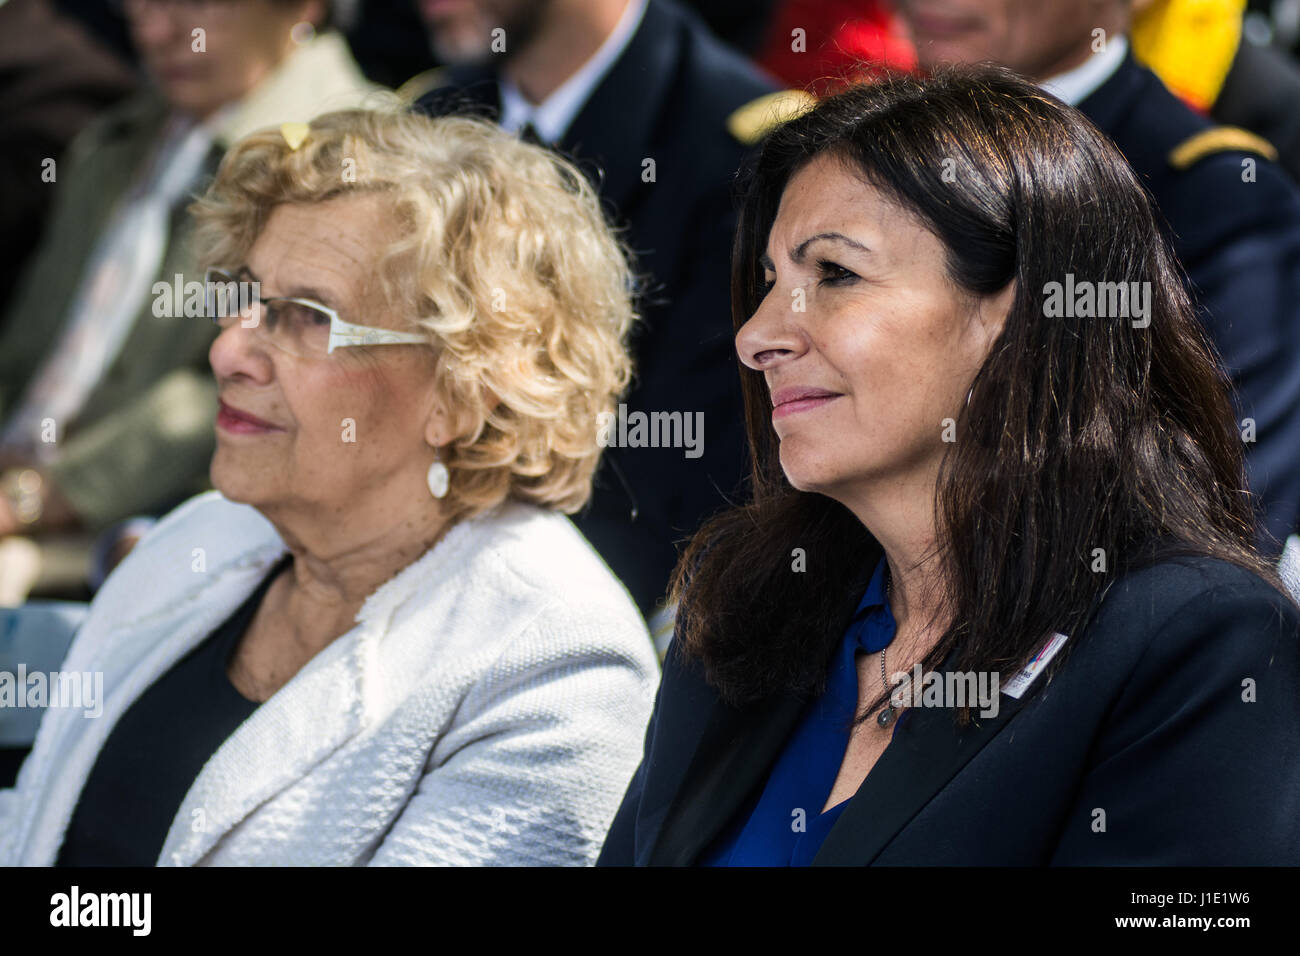 Madrid, Spain. 20th April, 2017. Mayor of Madrid Manuela Carmena (L) and Mayor of Paris Anne Hidalgo (R) during the commemoration of the Garden of the fighters of 'The Nine', the battalion of Spaniards that liberated Paris of Nazism, in Madrid, Spain. Credit: Marcos del Mazo /Alamy Live News Stock Photo